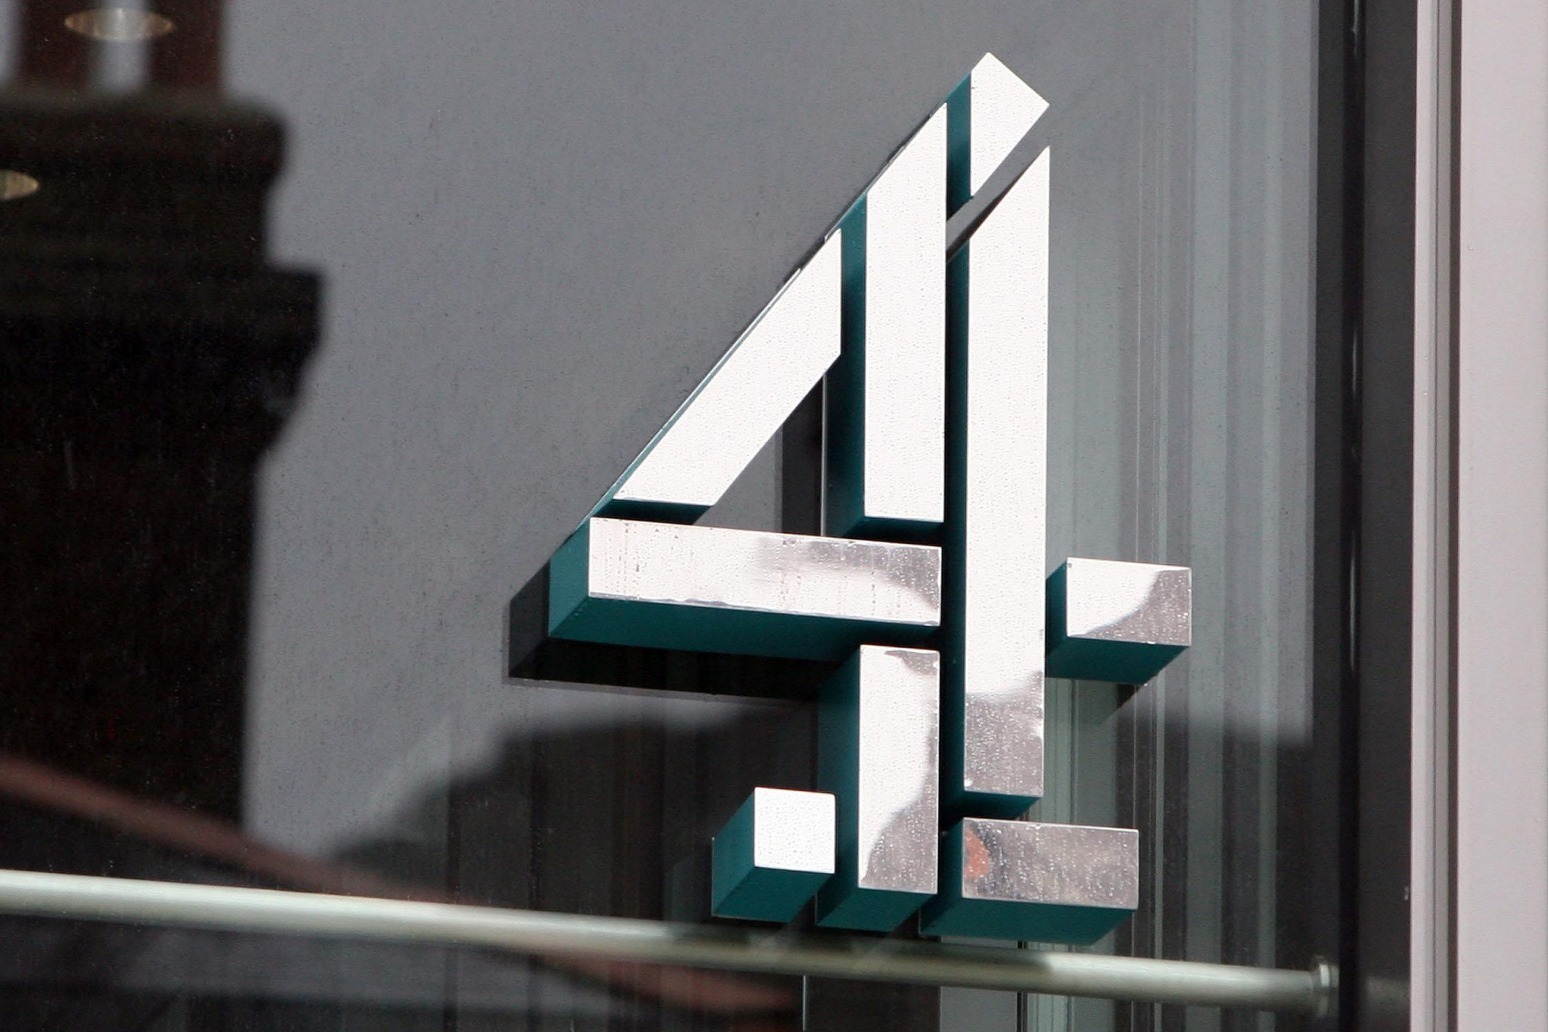 Trade body chief urges new Culture Secretary to reconsider Channel 4 plans 